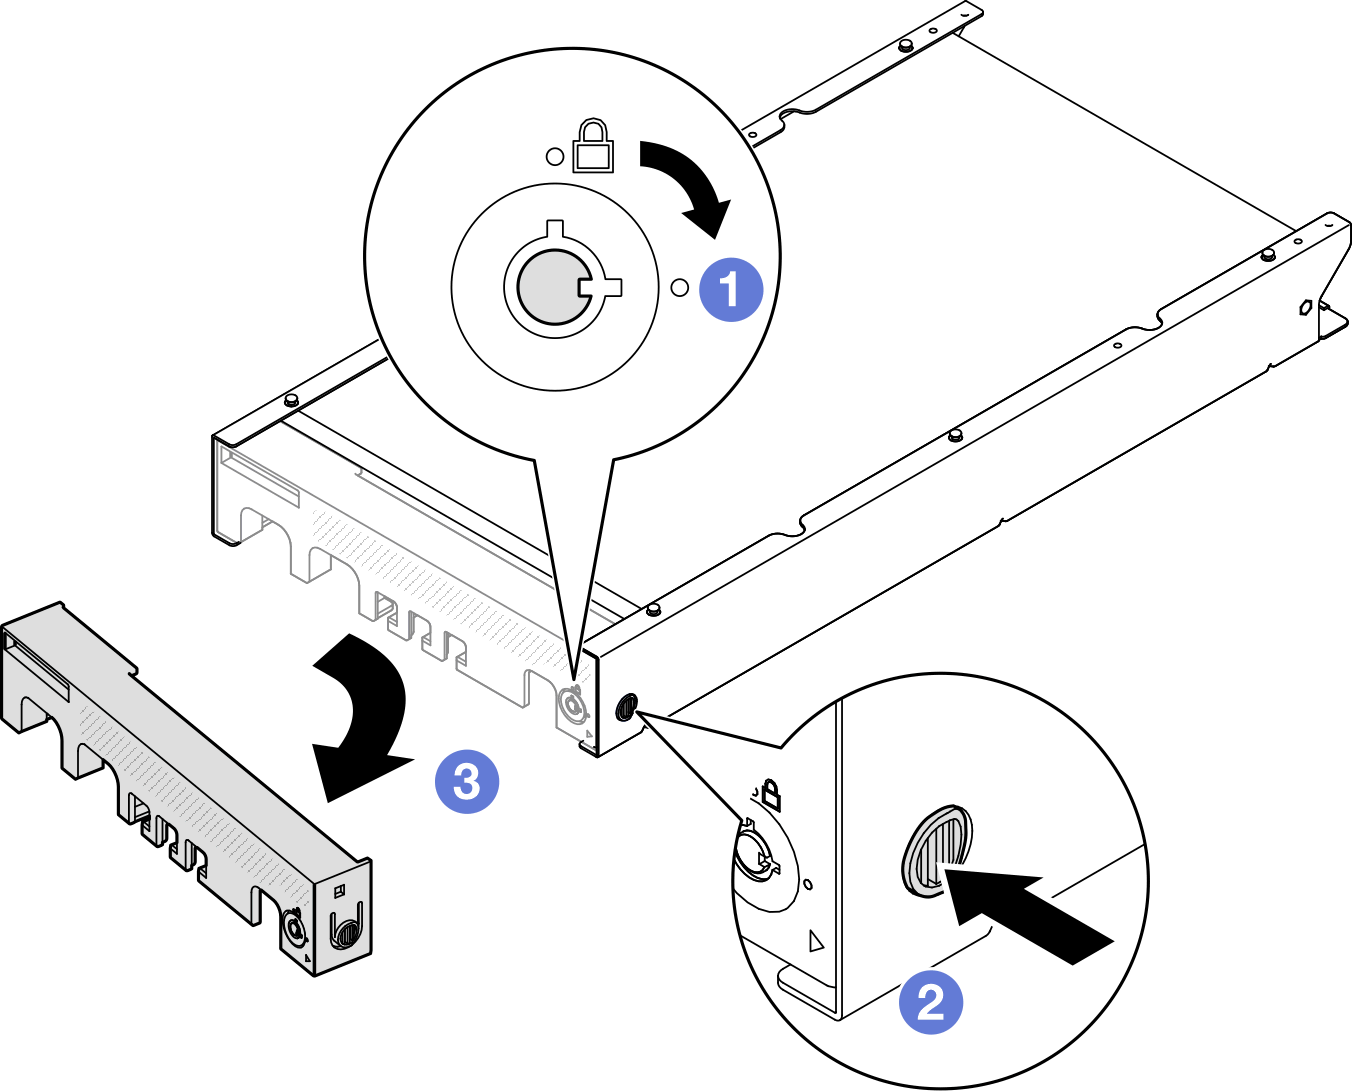 Removing the security bezel from a node sleeve